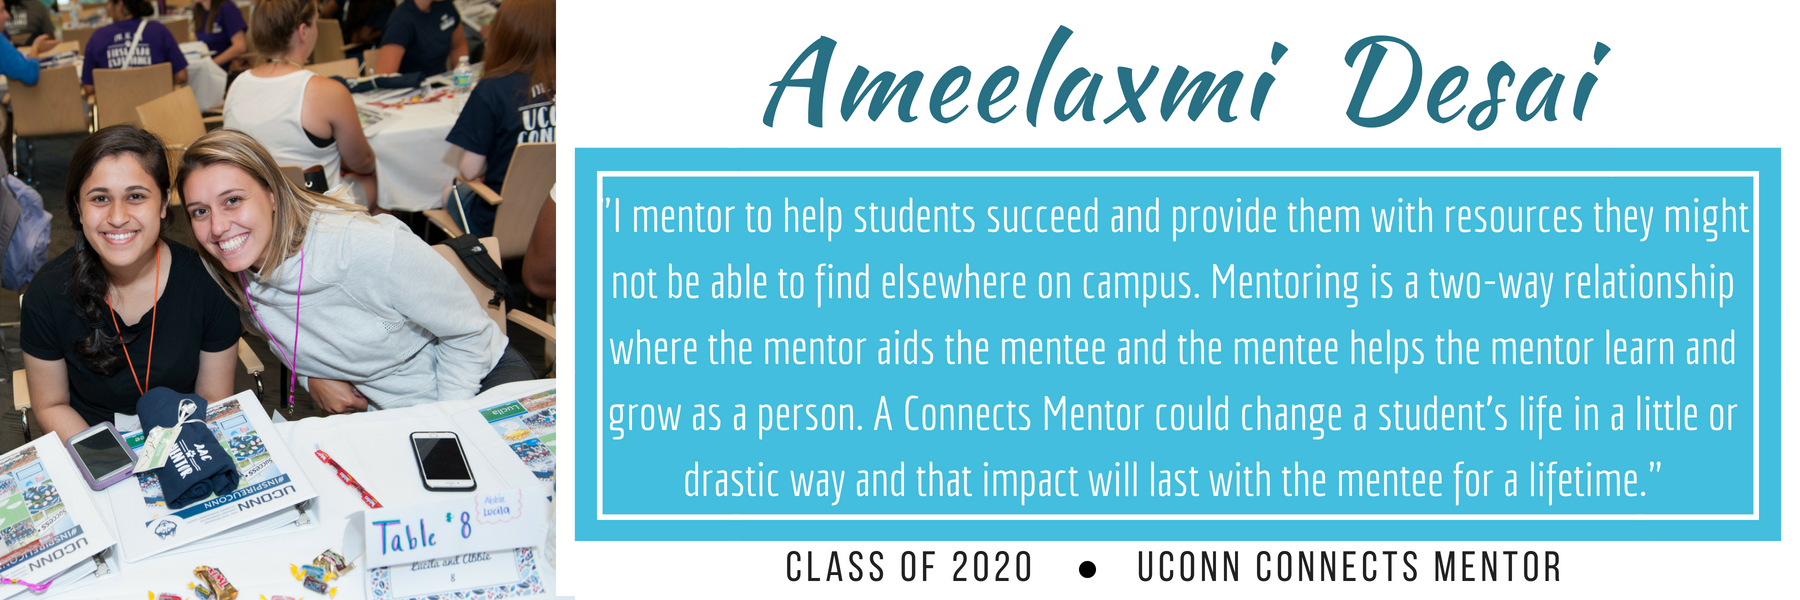 Amee Desai why I mentor